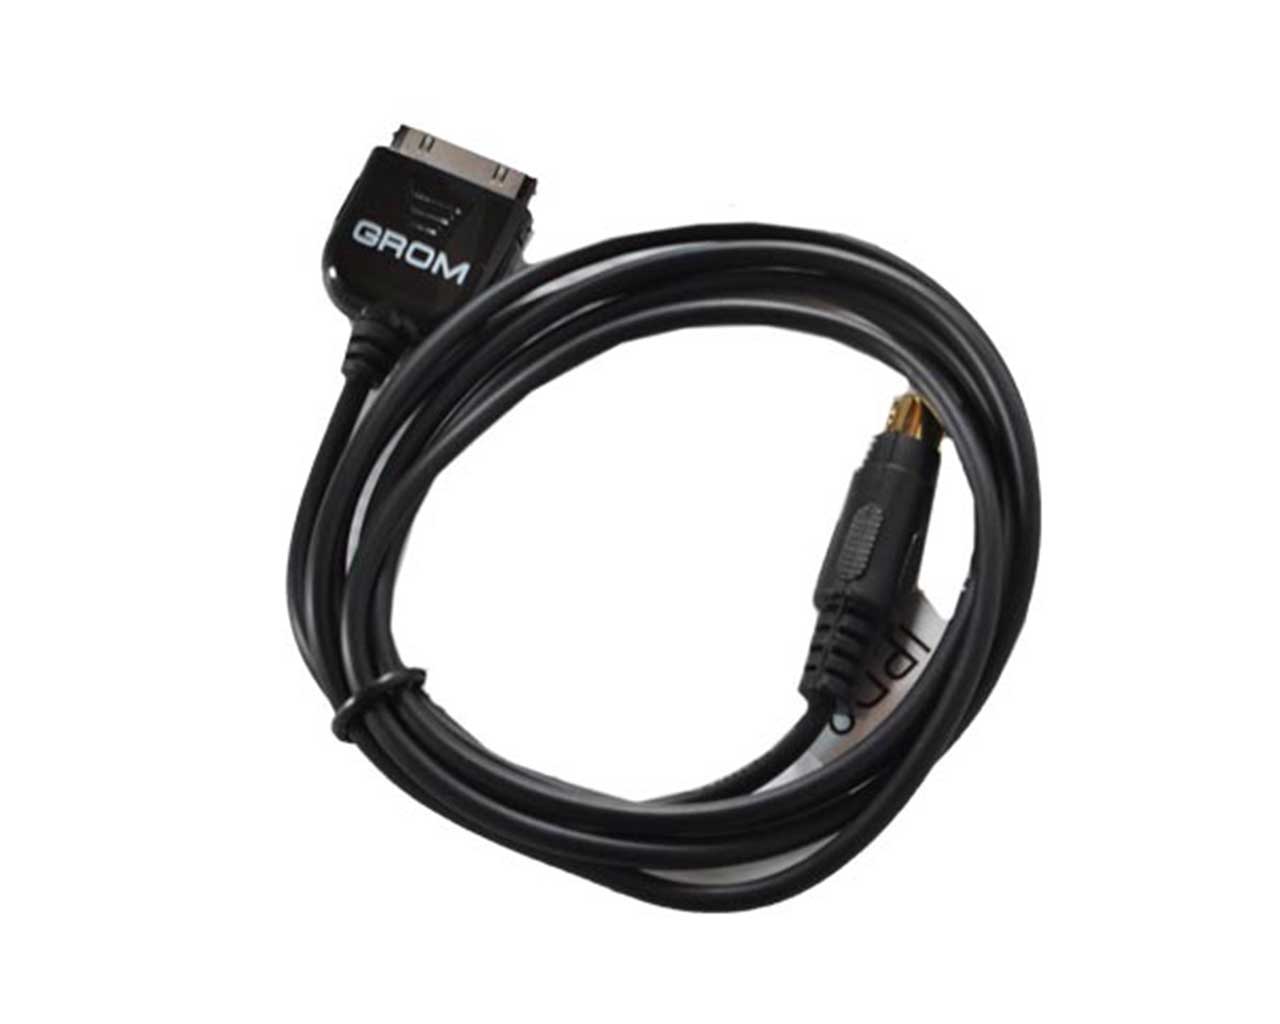 iPod 30-pin Cable for GROM units